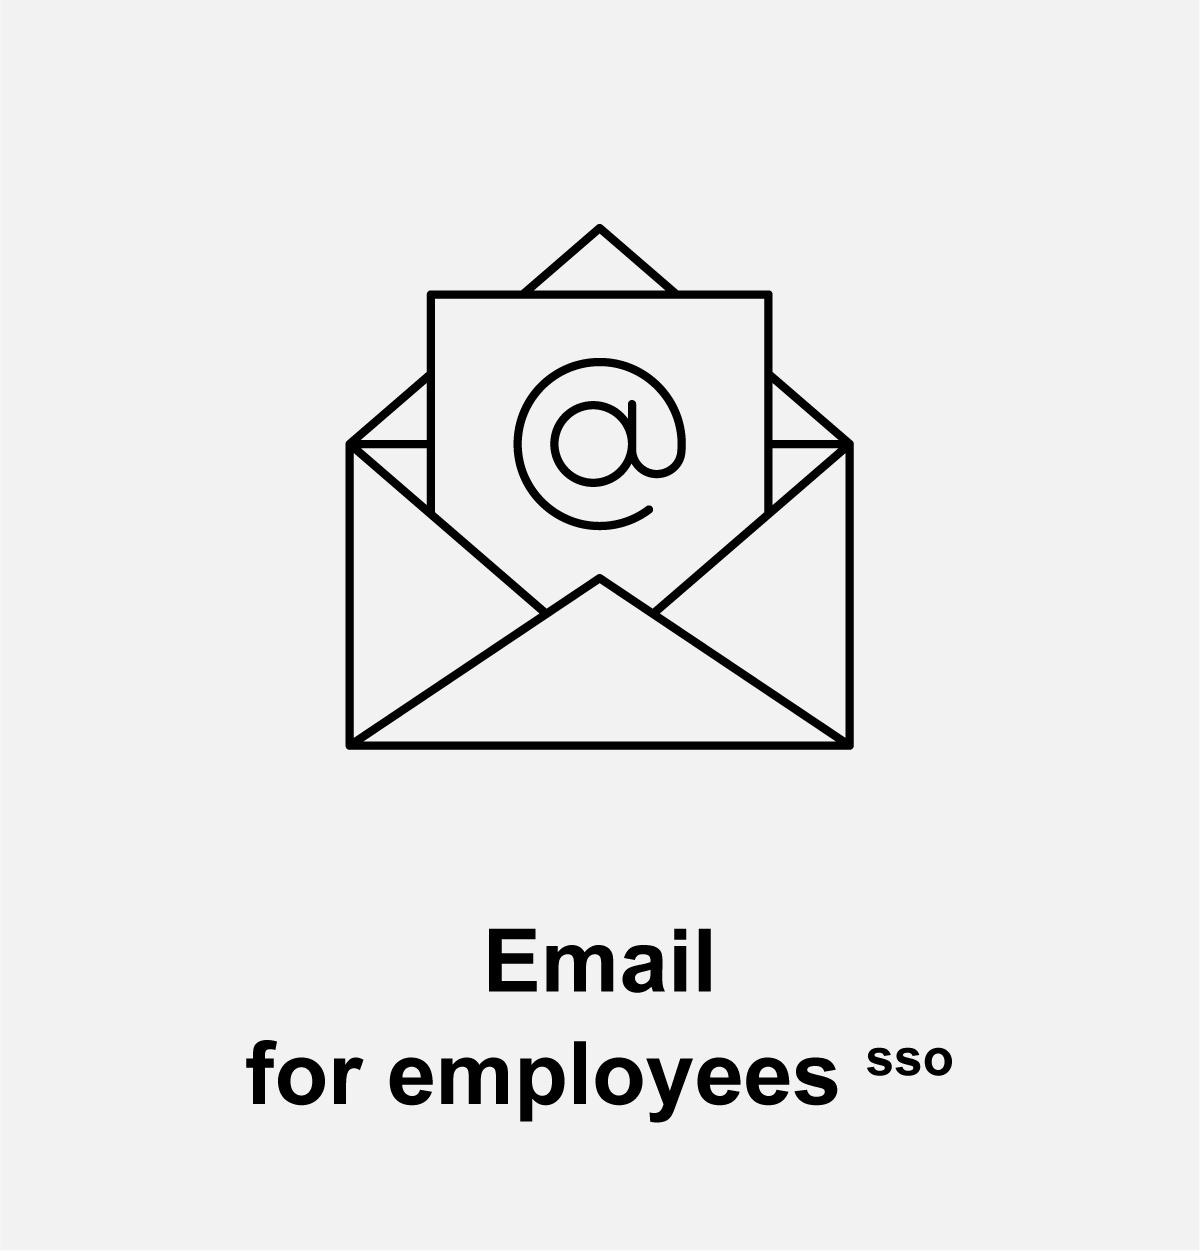 Email for employees